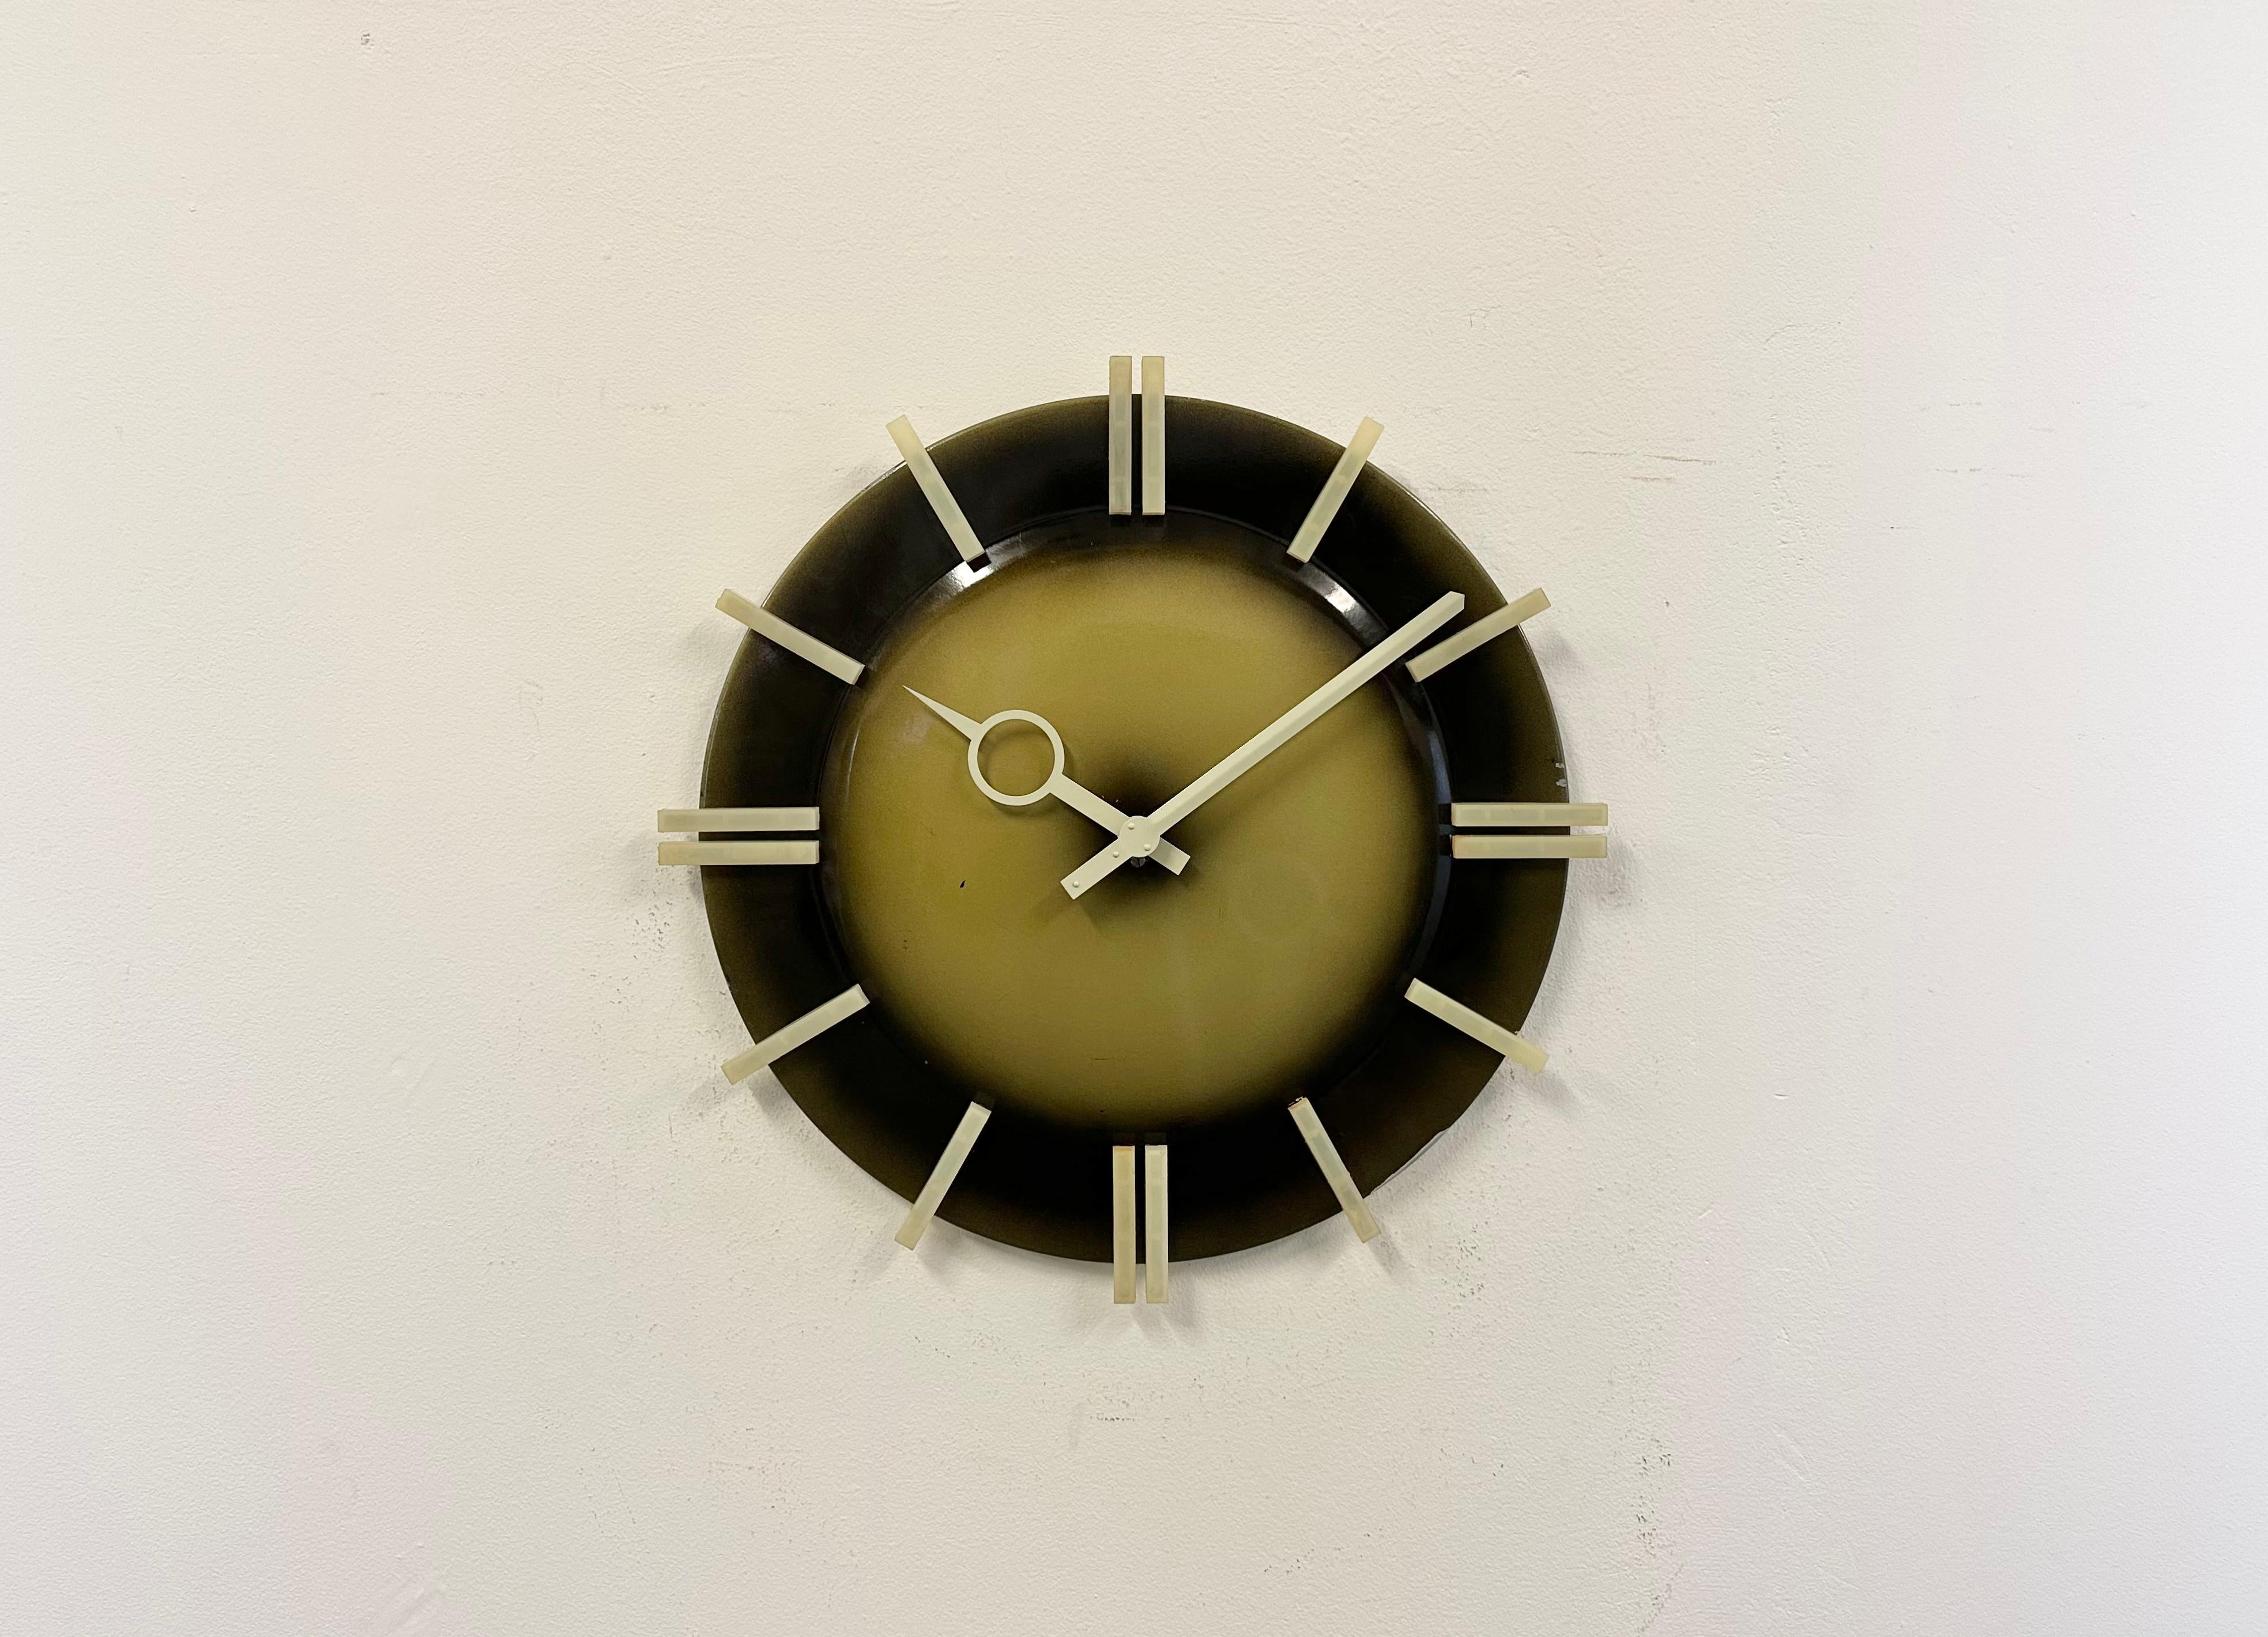 Pragotron PPH 413 is a type of indoor secondary clock. Was produced during the 1970s in former Czechoslovakia. Clock face with white plastic numerals is made from aluminum. Diameter is 43 cm. The piece has been converted into a battery-powered